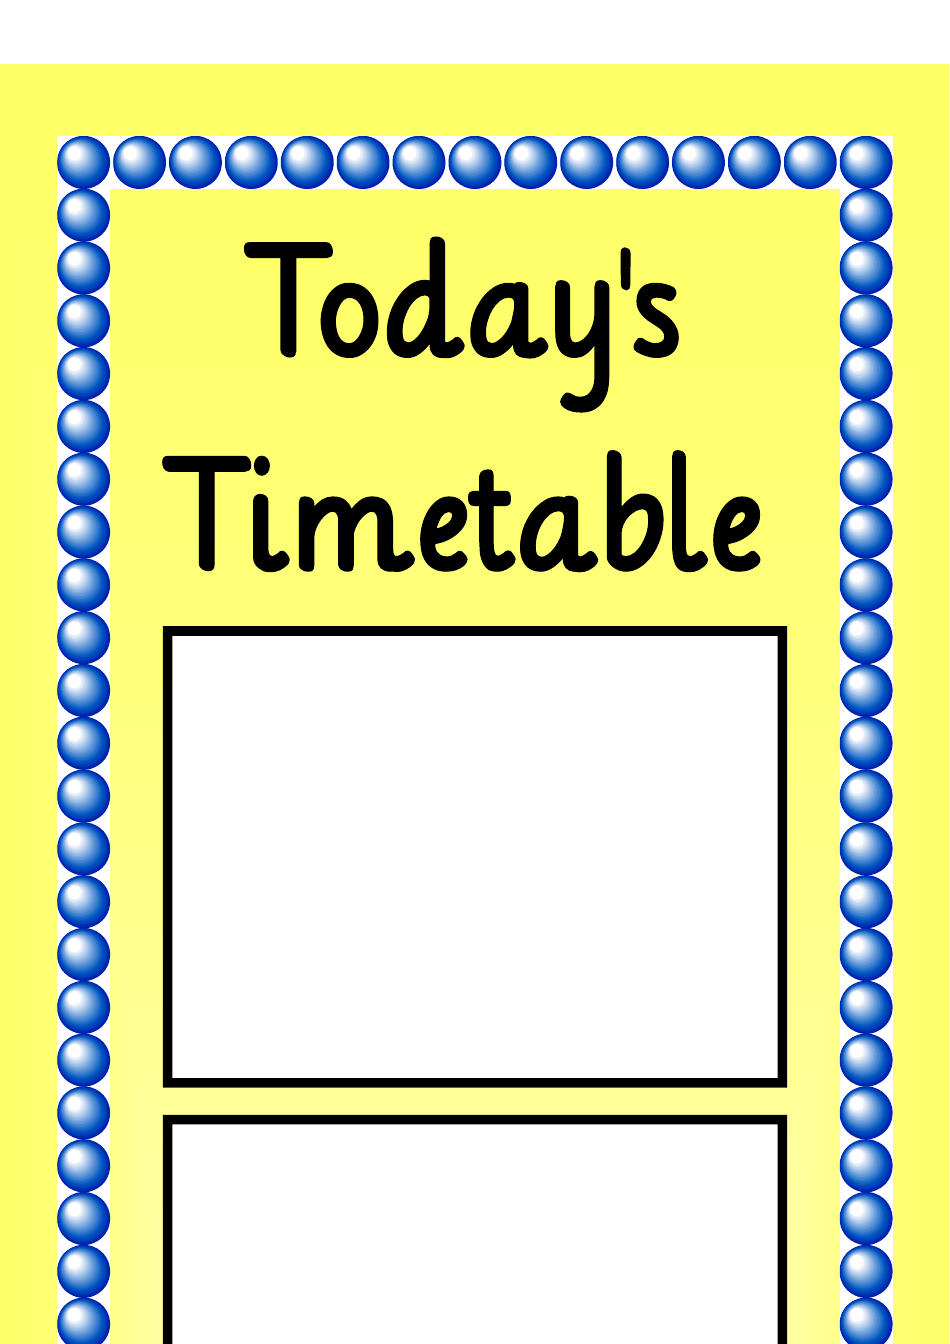 Today's Timetable Schedule Template - Yellow image preview